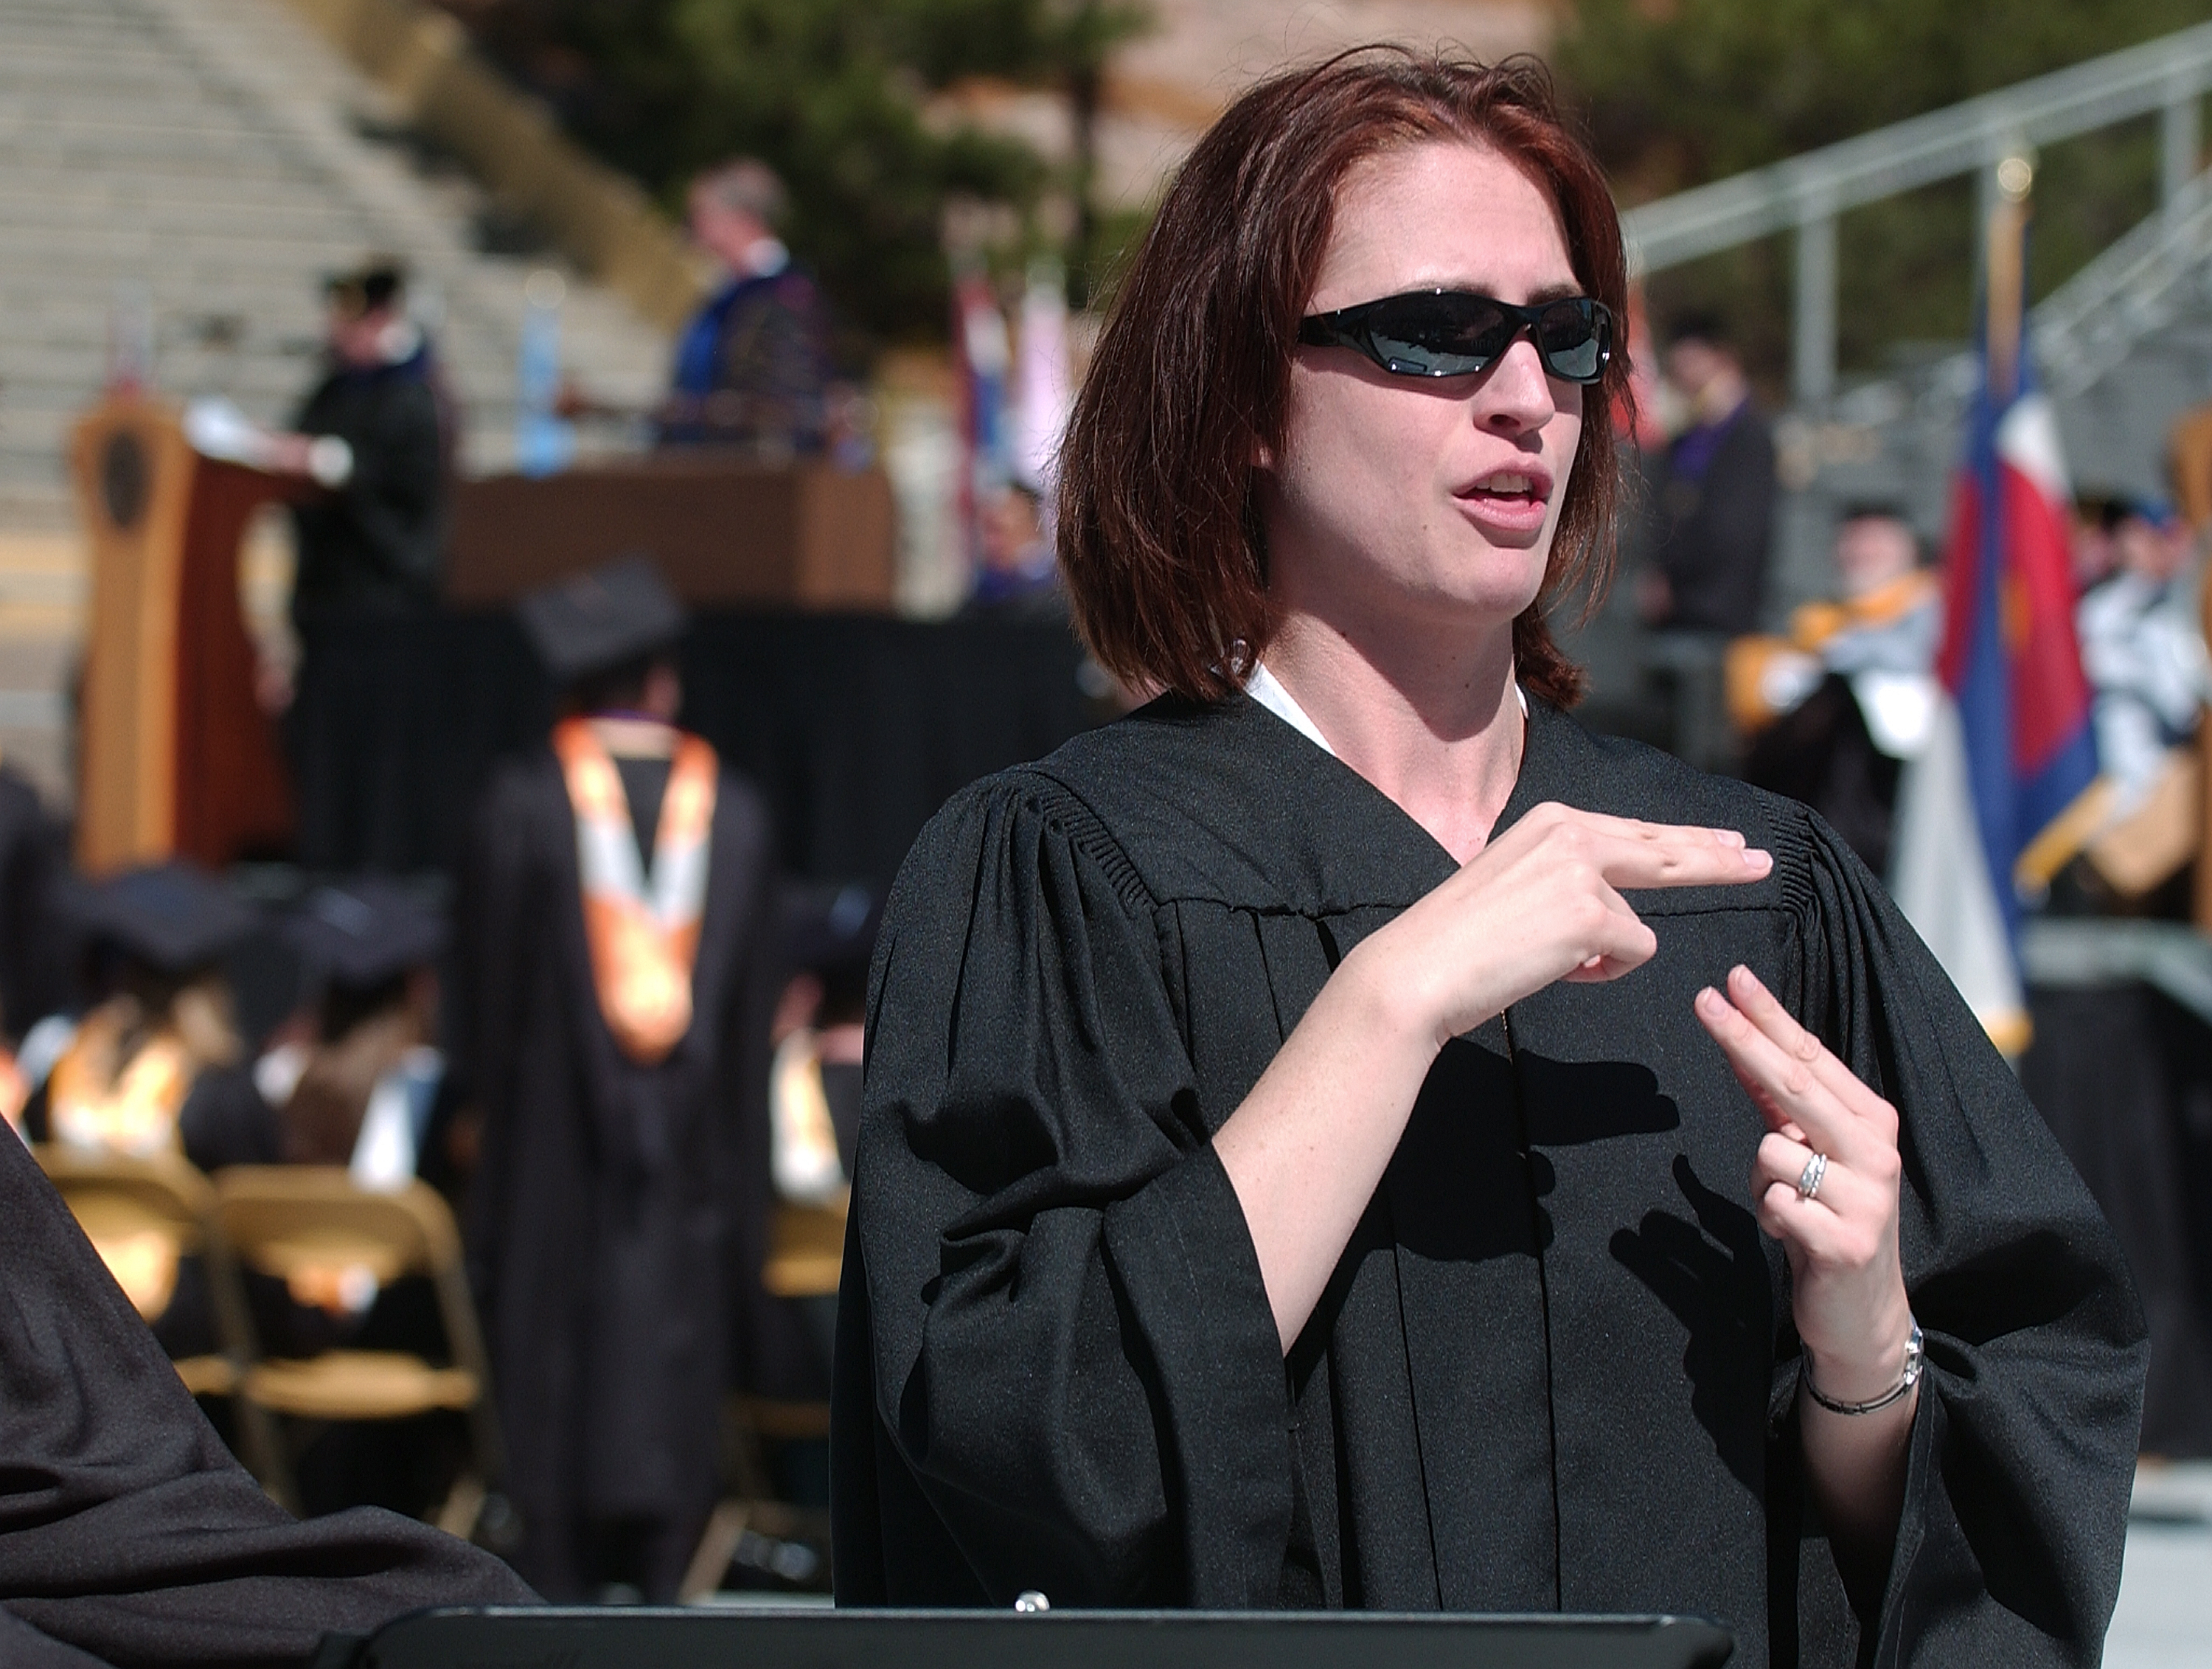 Person speaking sign language at commencement